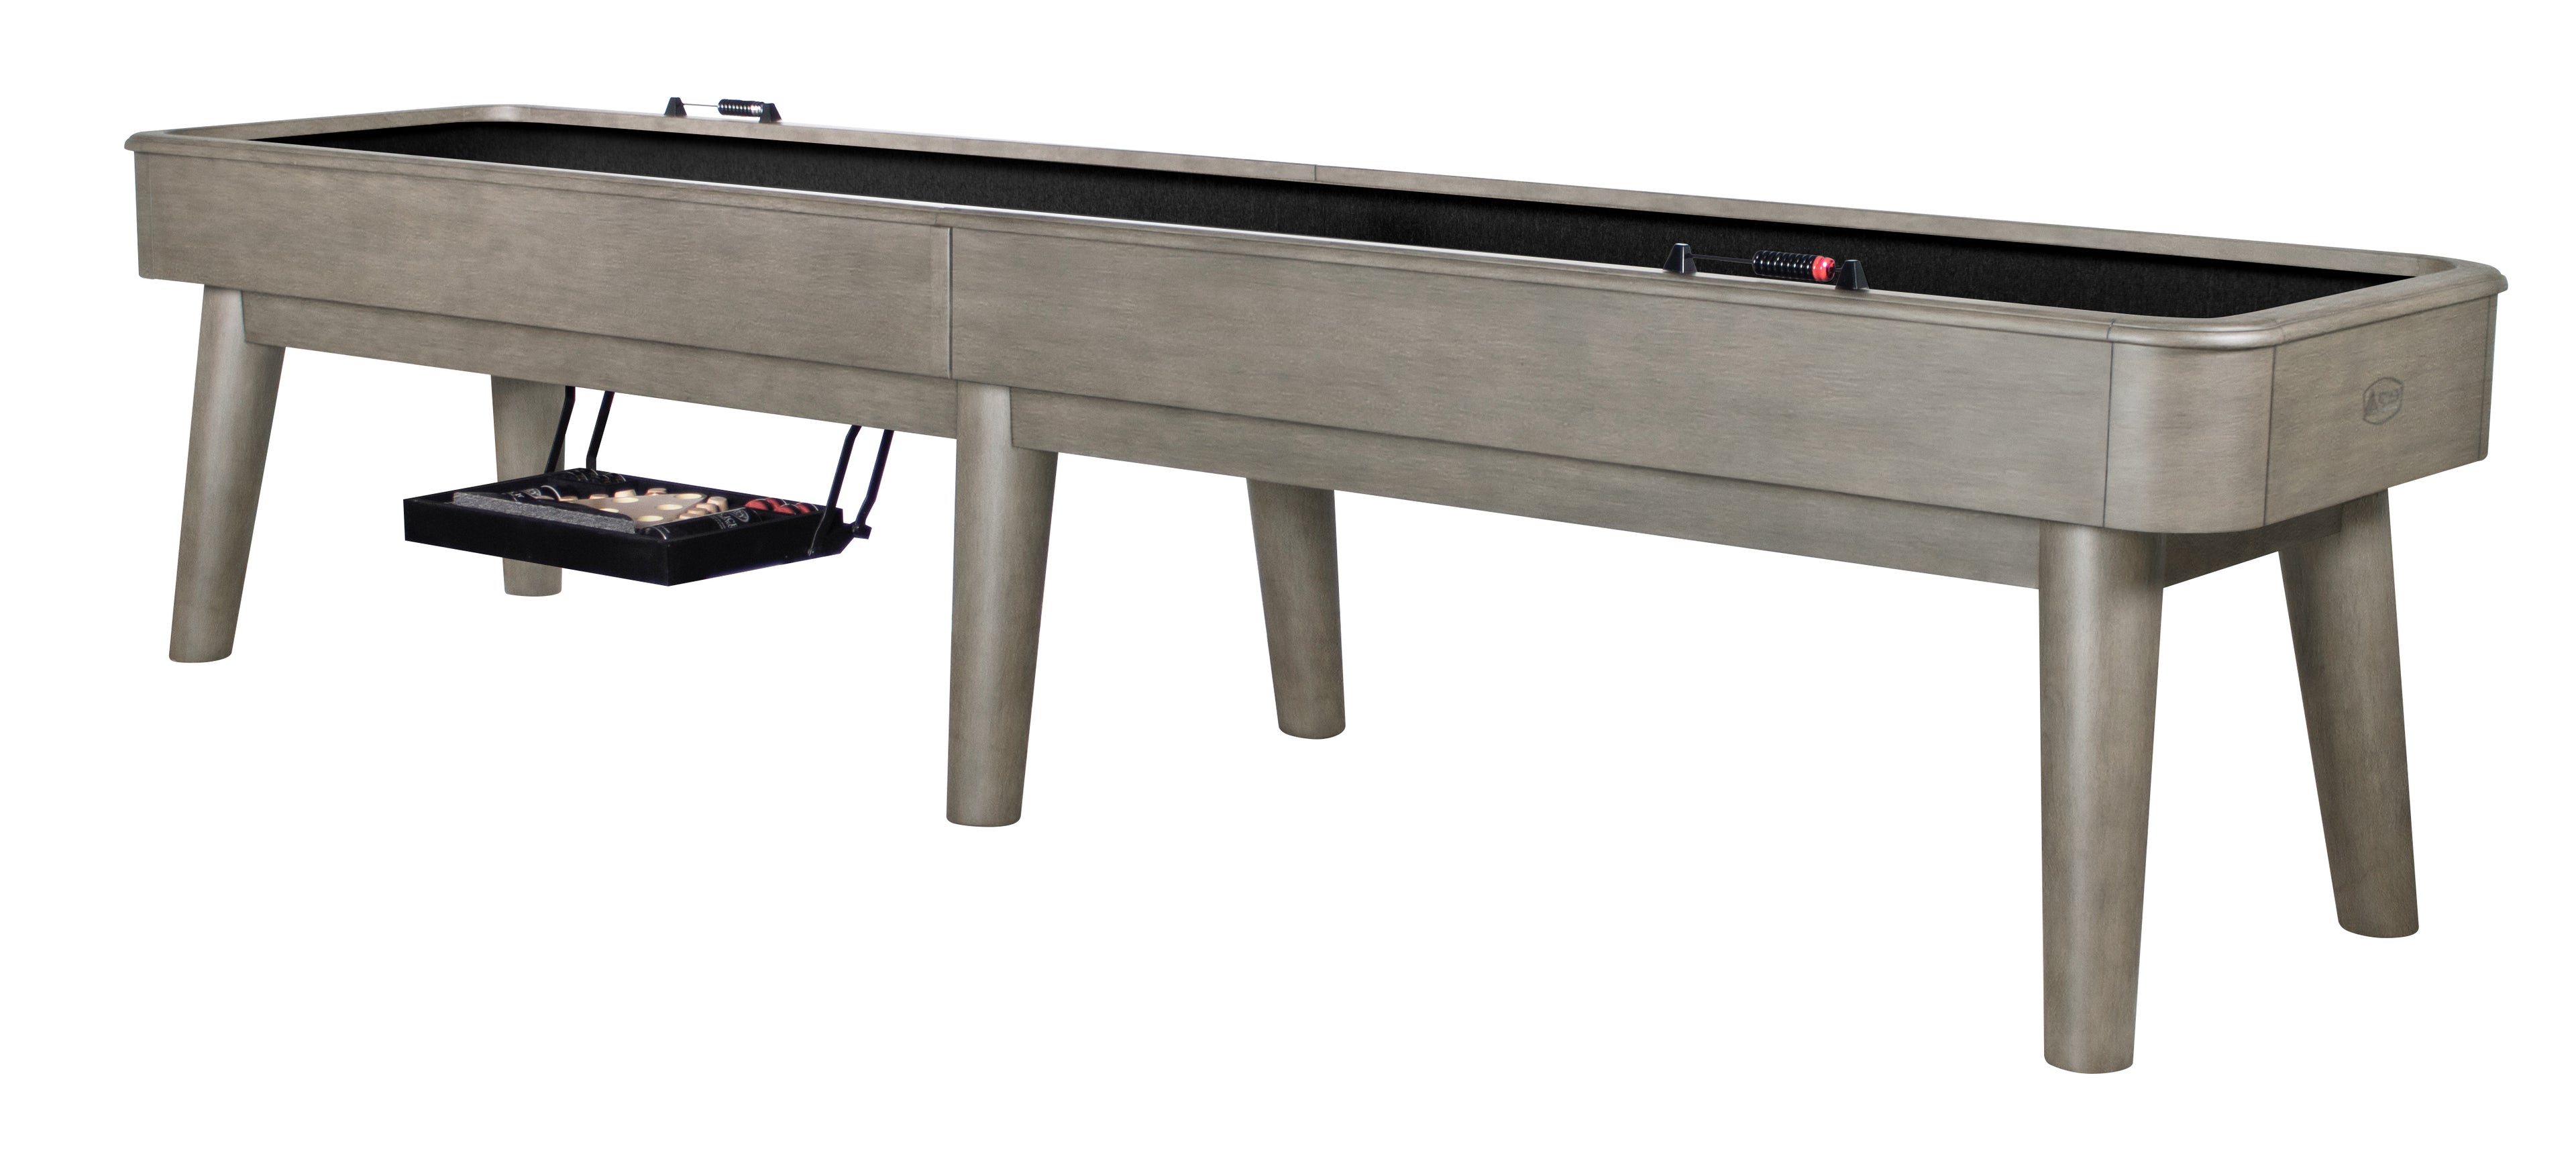 Legacy Billiards Collins 14 Ft Shuffleboard in Overcast Finish